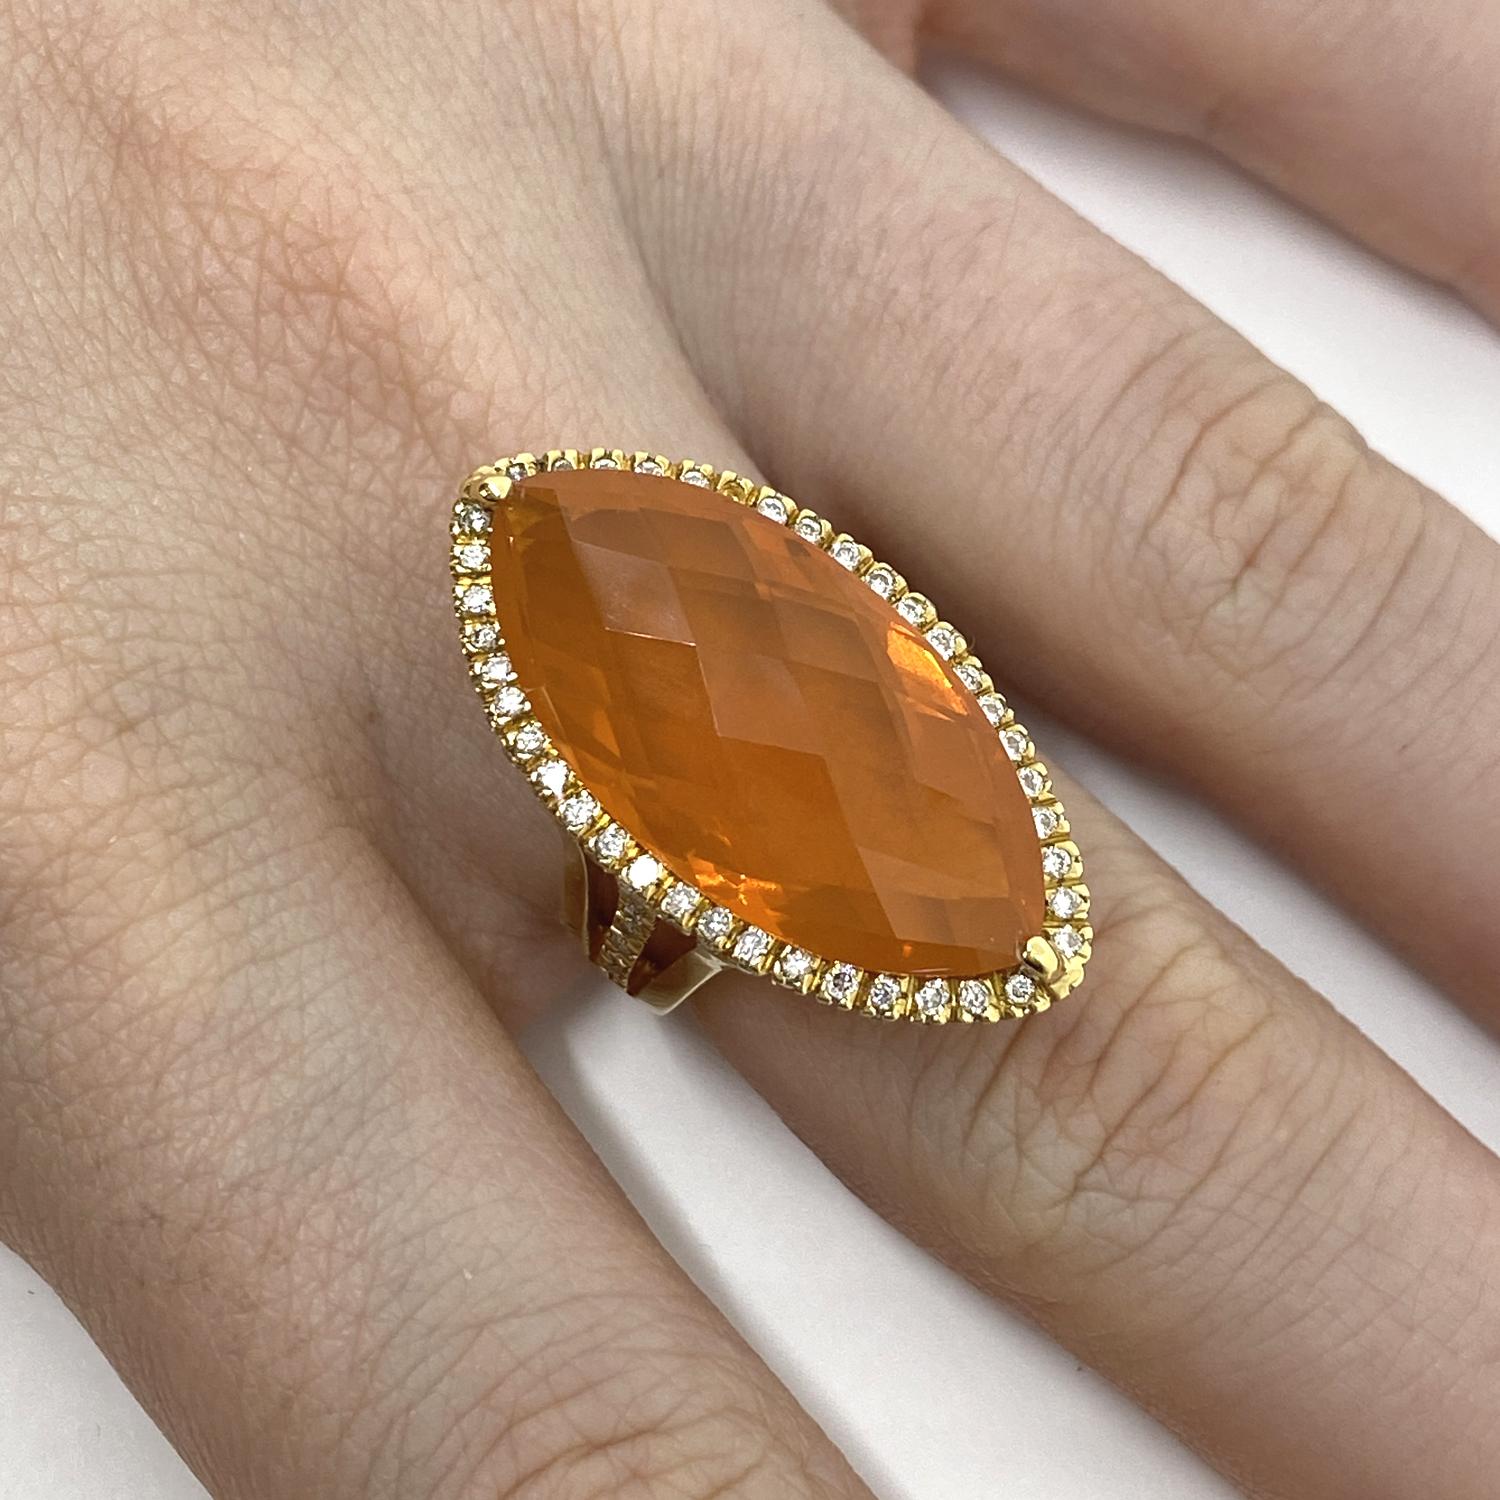 Ring made of 18 kt yellow gold with central Navette made of natural citrine quartz and outline of natural white brilliant-cut diamonds for ct.0.75

Welcome to our jewelry collection, where every piece tells a story of timeless elegance and